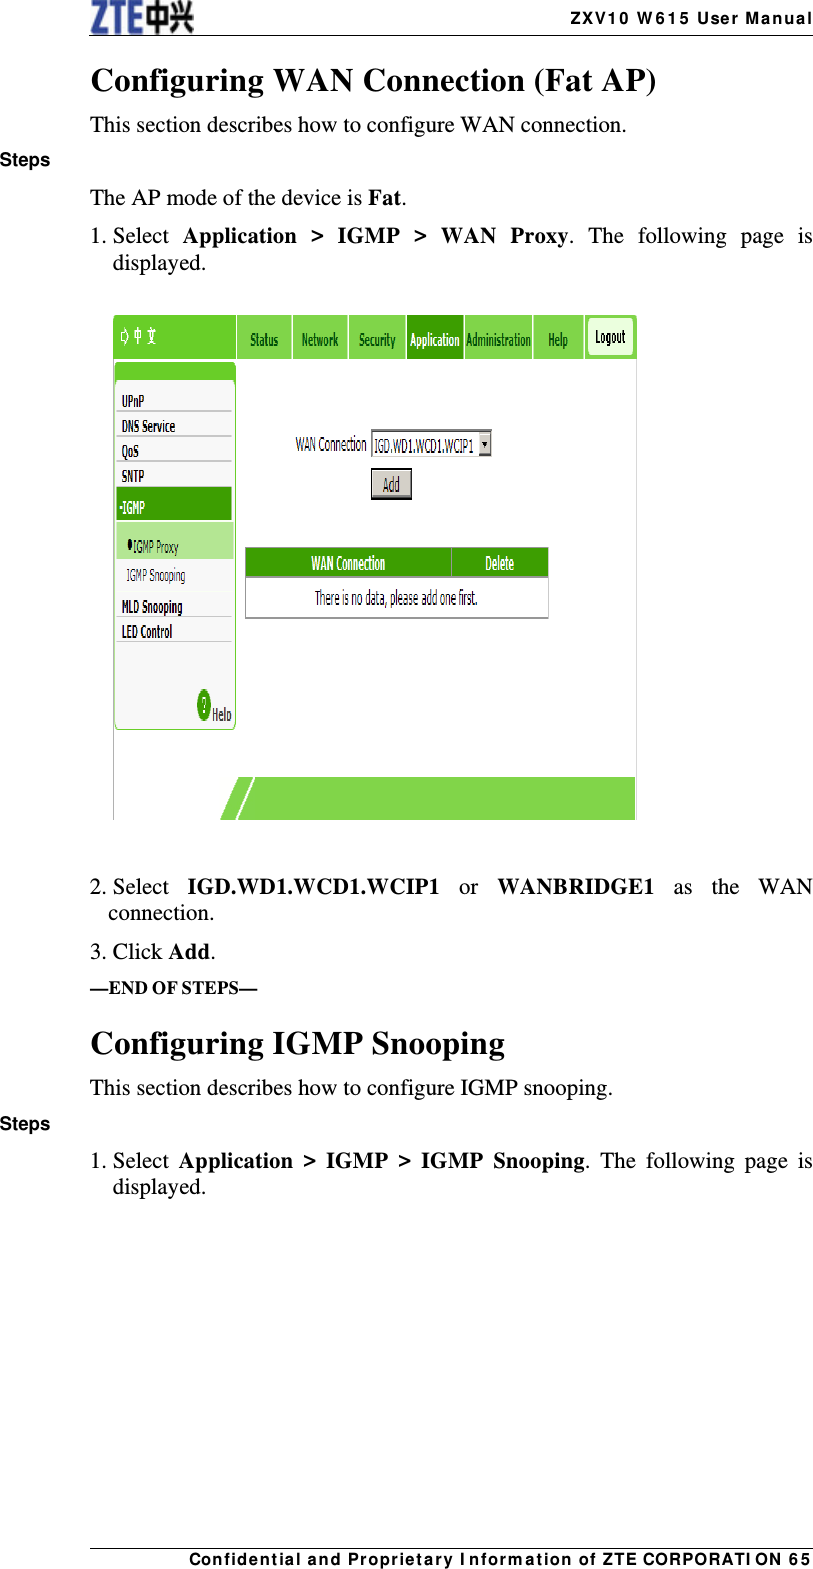    ZX V1 0  W 6 1 5  User Manua lCon fidentia l and Propriet a ry I nform a t ion of ZTE CORPORATI ON  6 5 Configuring WAN Connection (Fat AP) This section describes how to configure WAN connection. Steps The AP mode of the device is Fat. 1. Select  Application &gt; IGMP &gt; WAN Proxy. The following page is displayed.    2. Select  IGD.WD1.WCD1.WCIP1 or WANBRIDGE1 as the WAN connection. 3. Click Add. —END OF STEPS— Configuring IGMP Snooping This section describes how to configure IGMP snooping. Steps 1. Select  Application &gt; IGMP &gt; IGMP Snooping. The following page is displayed. 